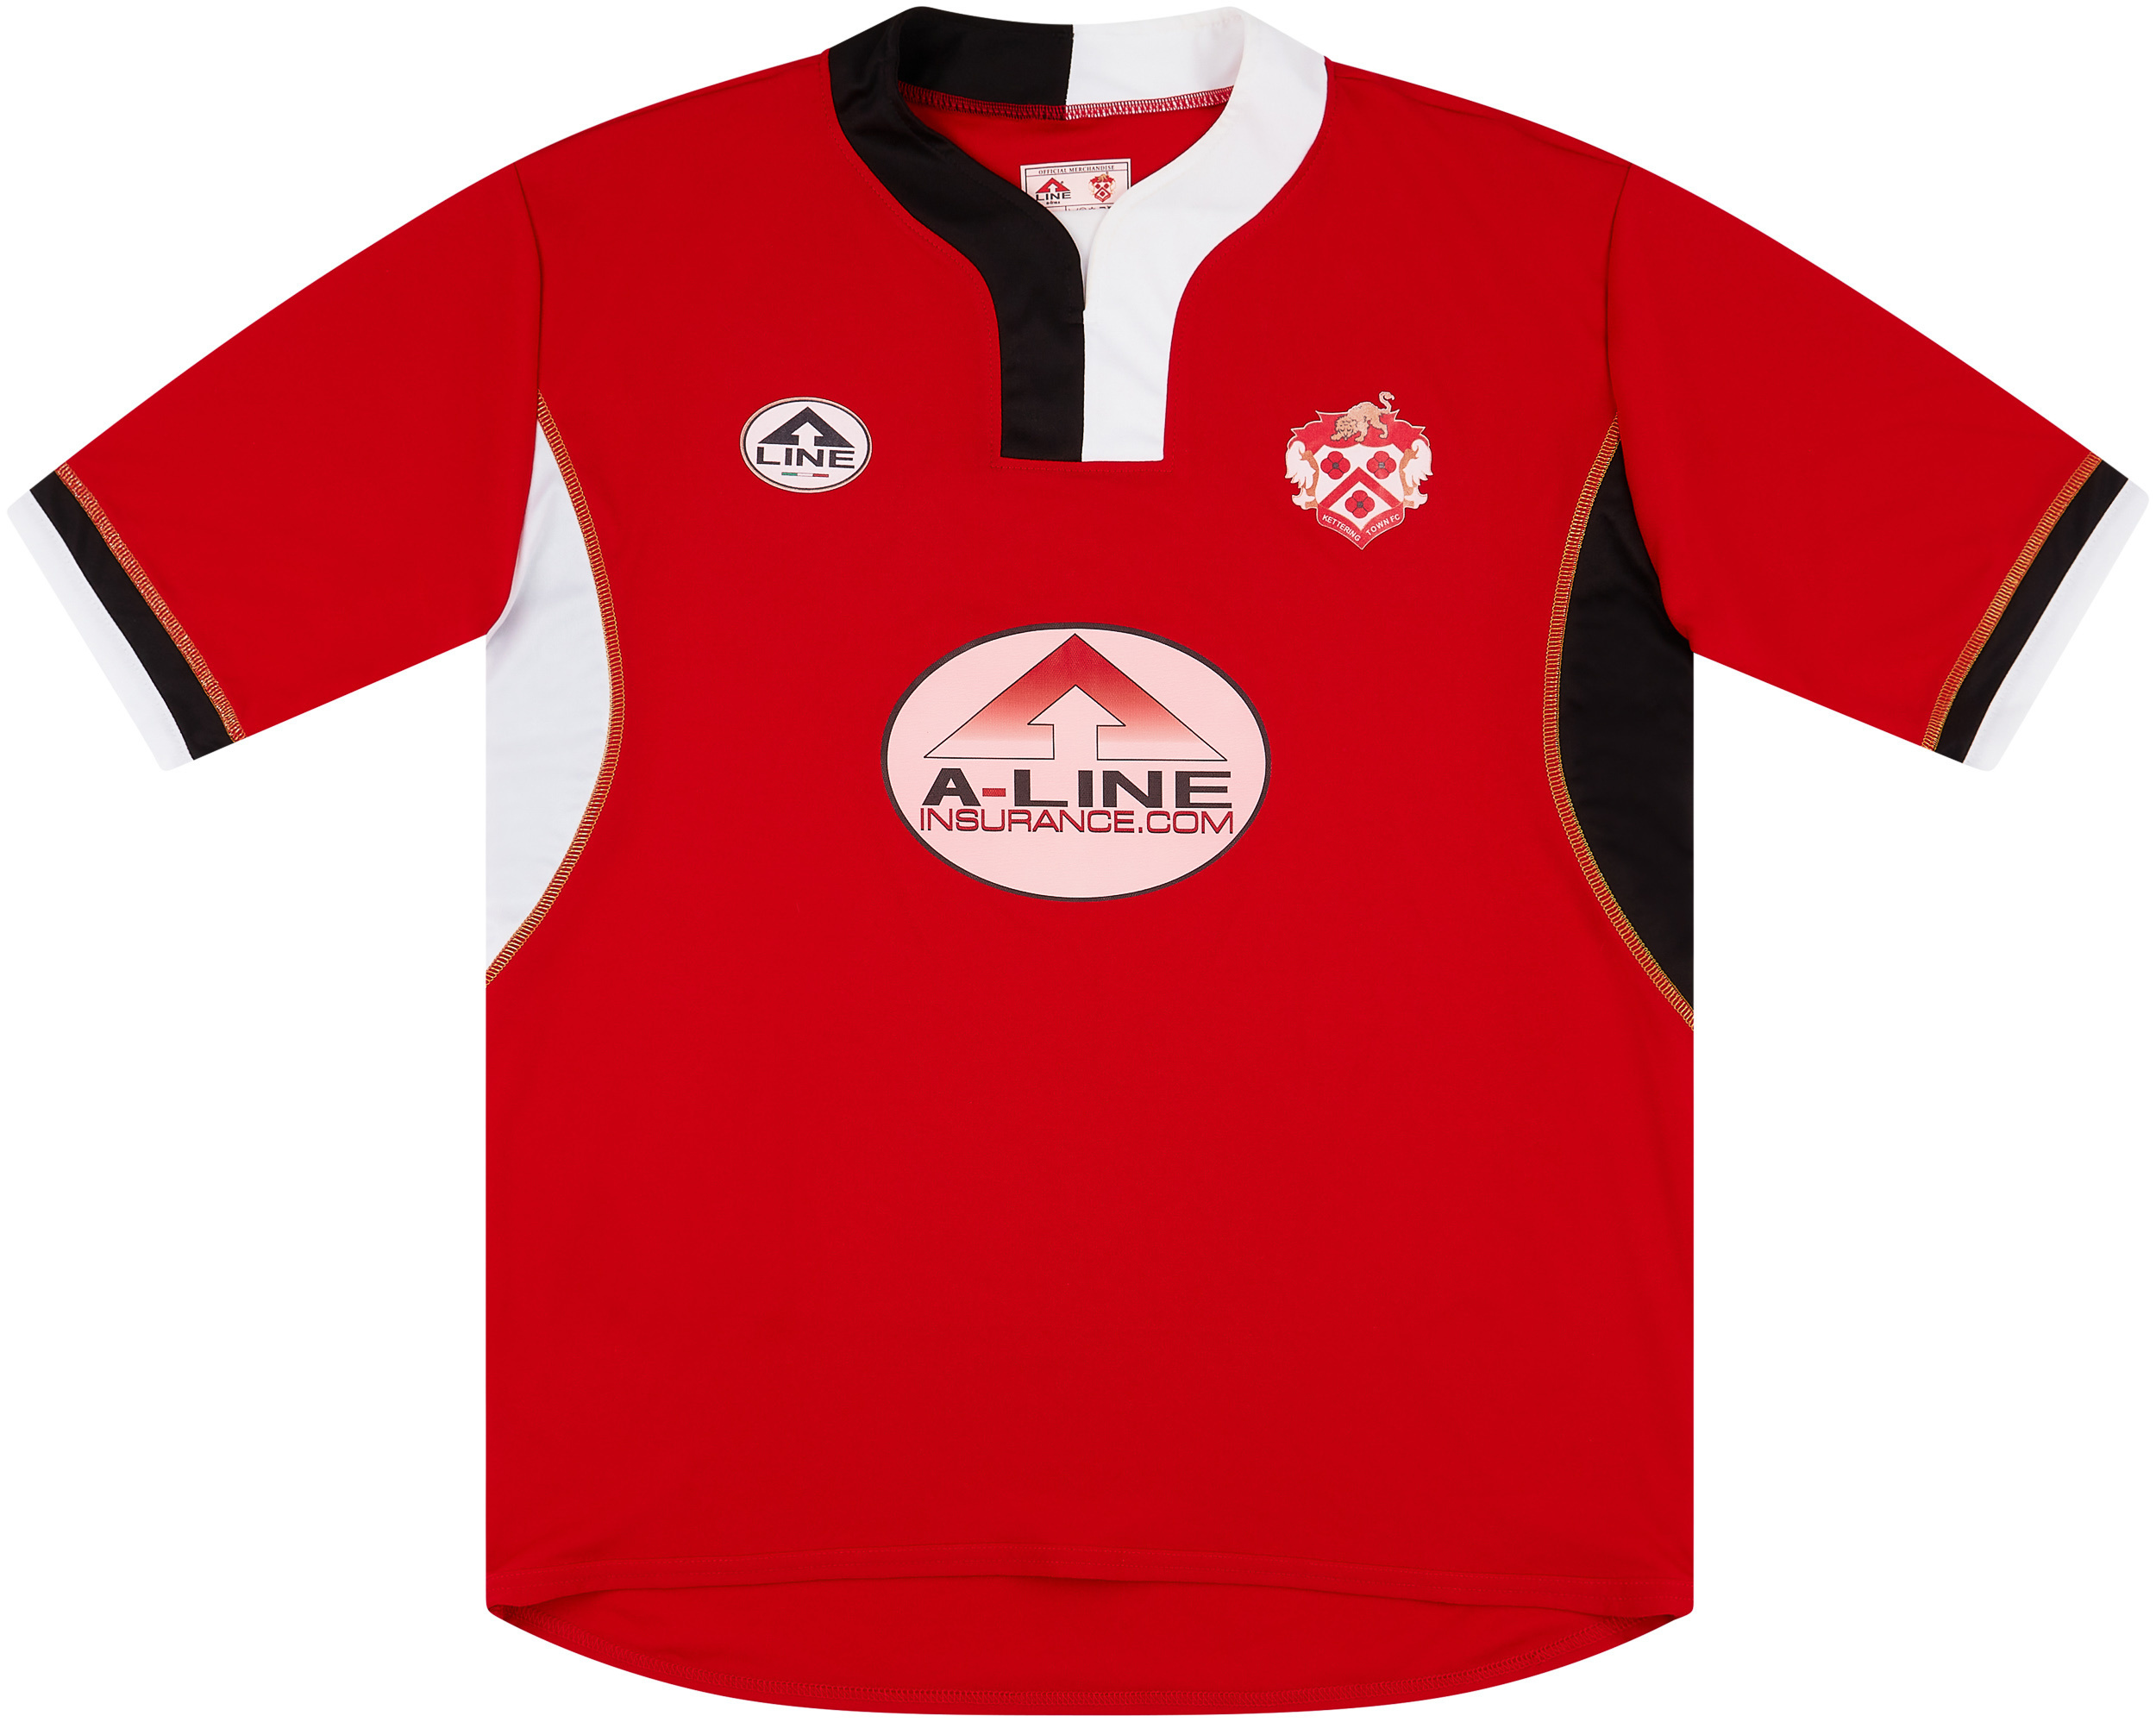 2006-07 Kettering Town Home Shirt - 8/10 - ()